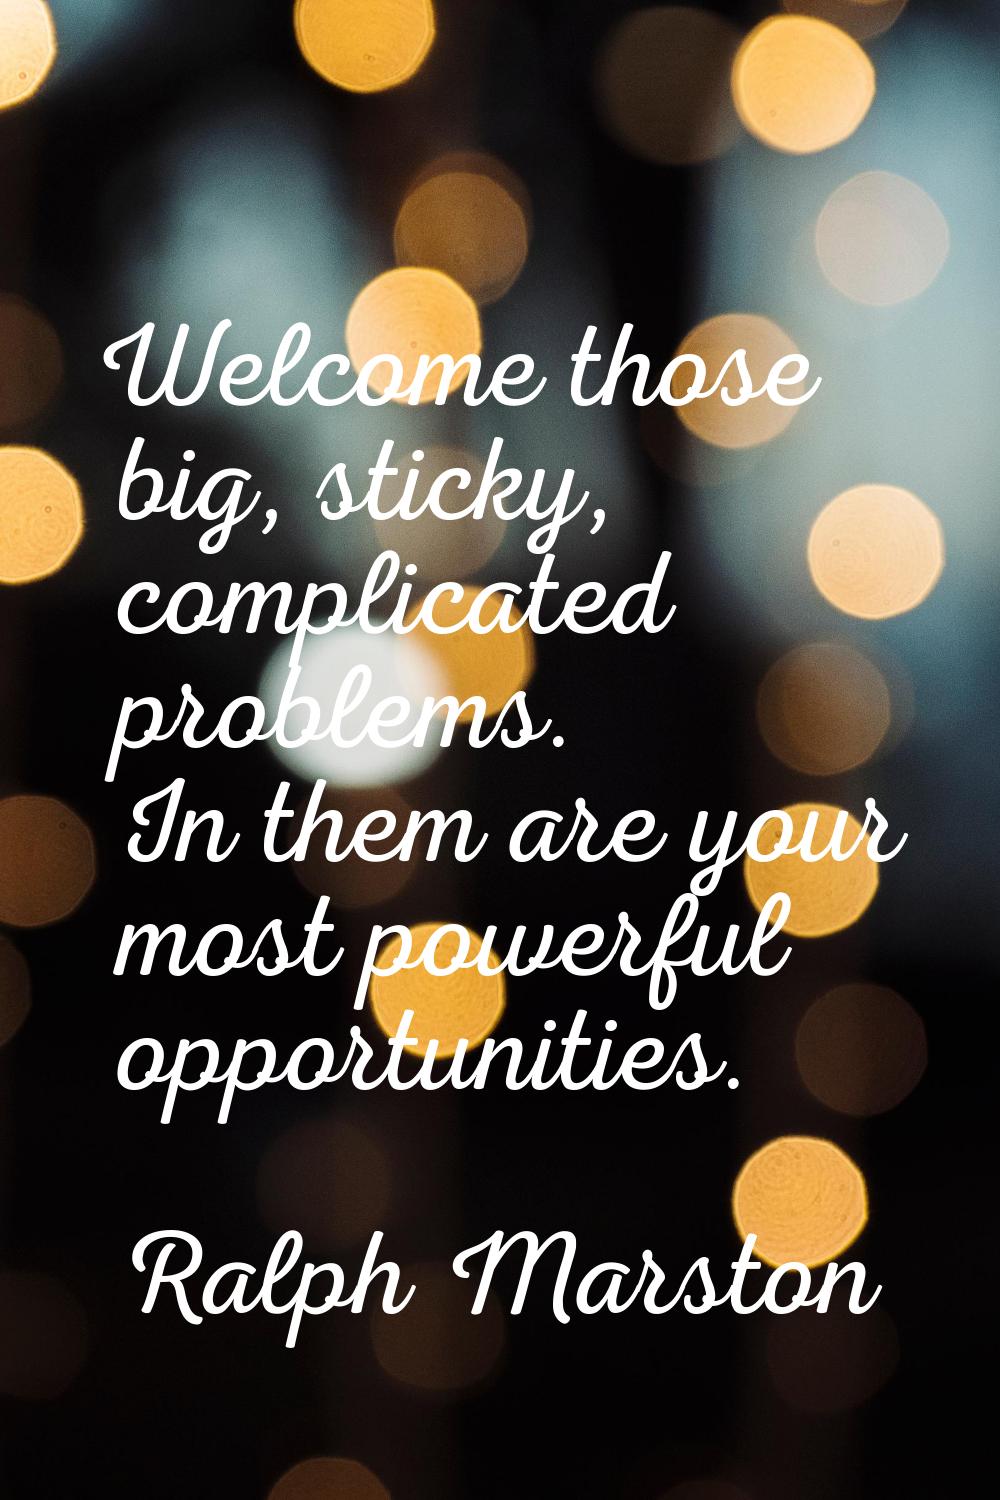 Welcome those big, sticky, complicated problems. In them are your most powerful opportunities.